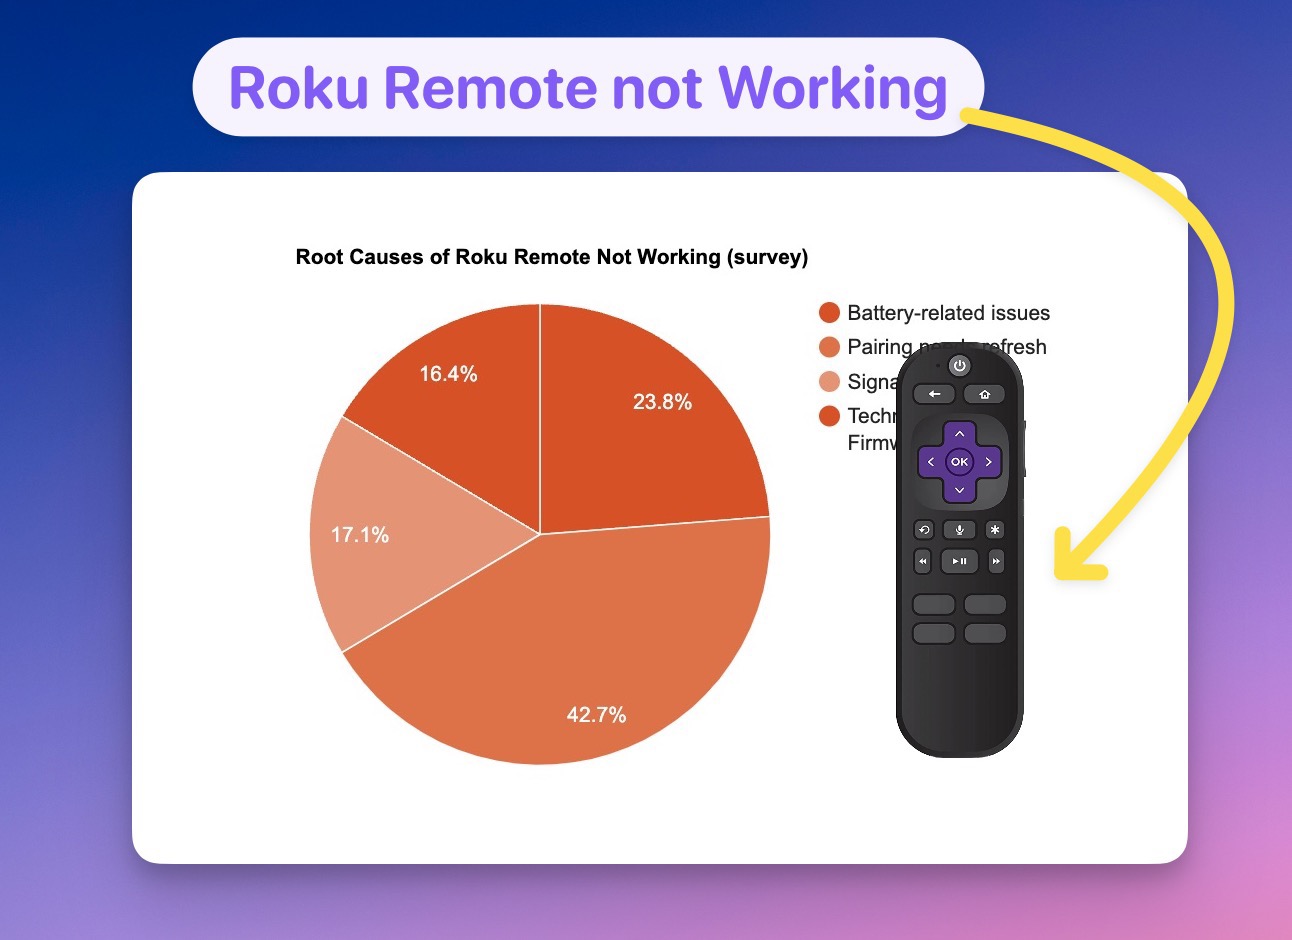 How to Fix a Roku Remote Not Working or Responding